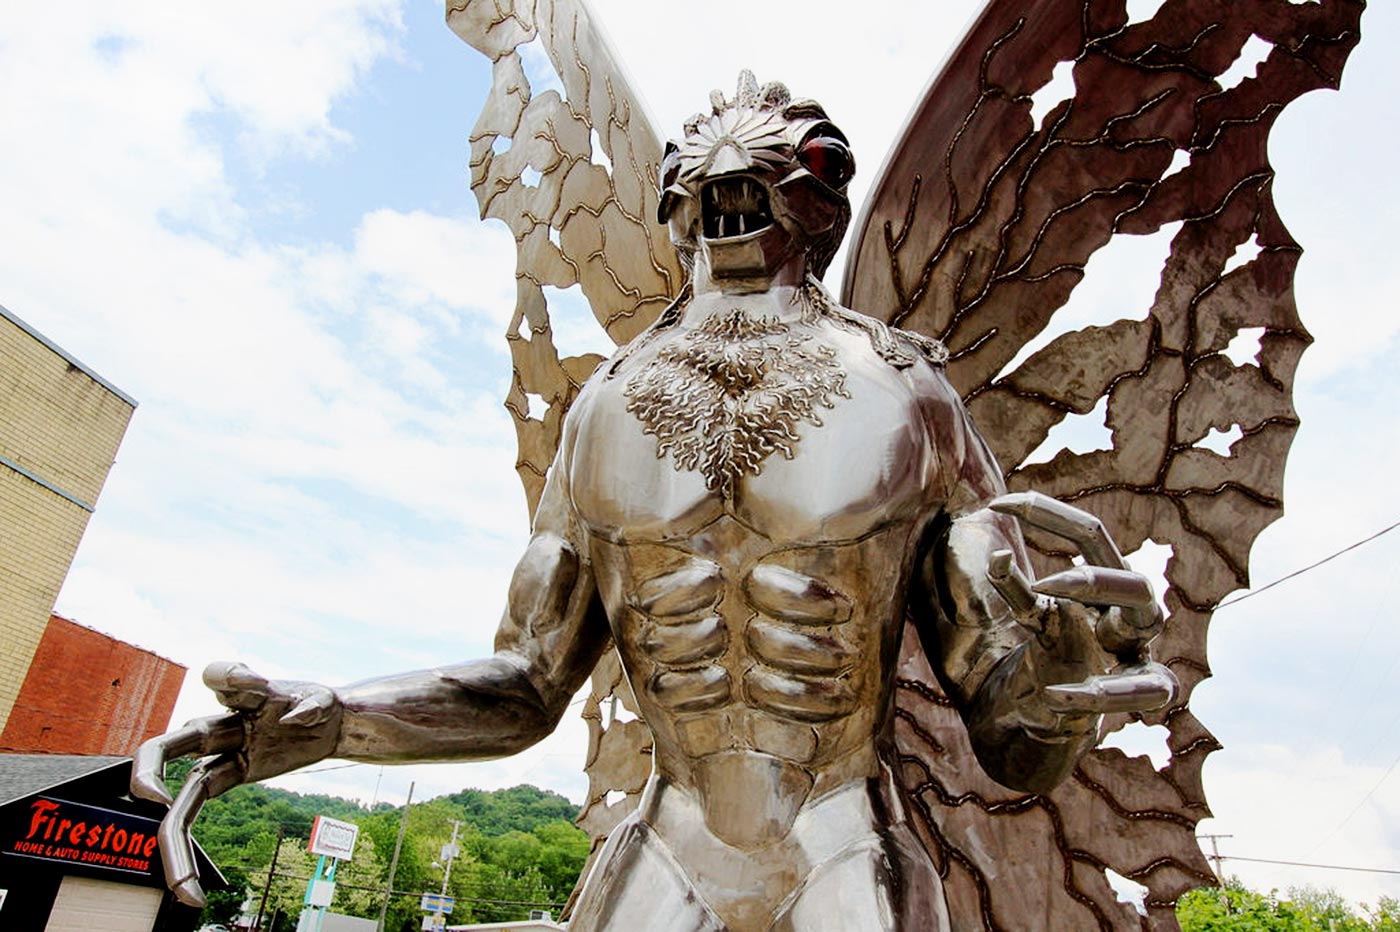 The Mothman’s Pitch For A New Statue